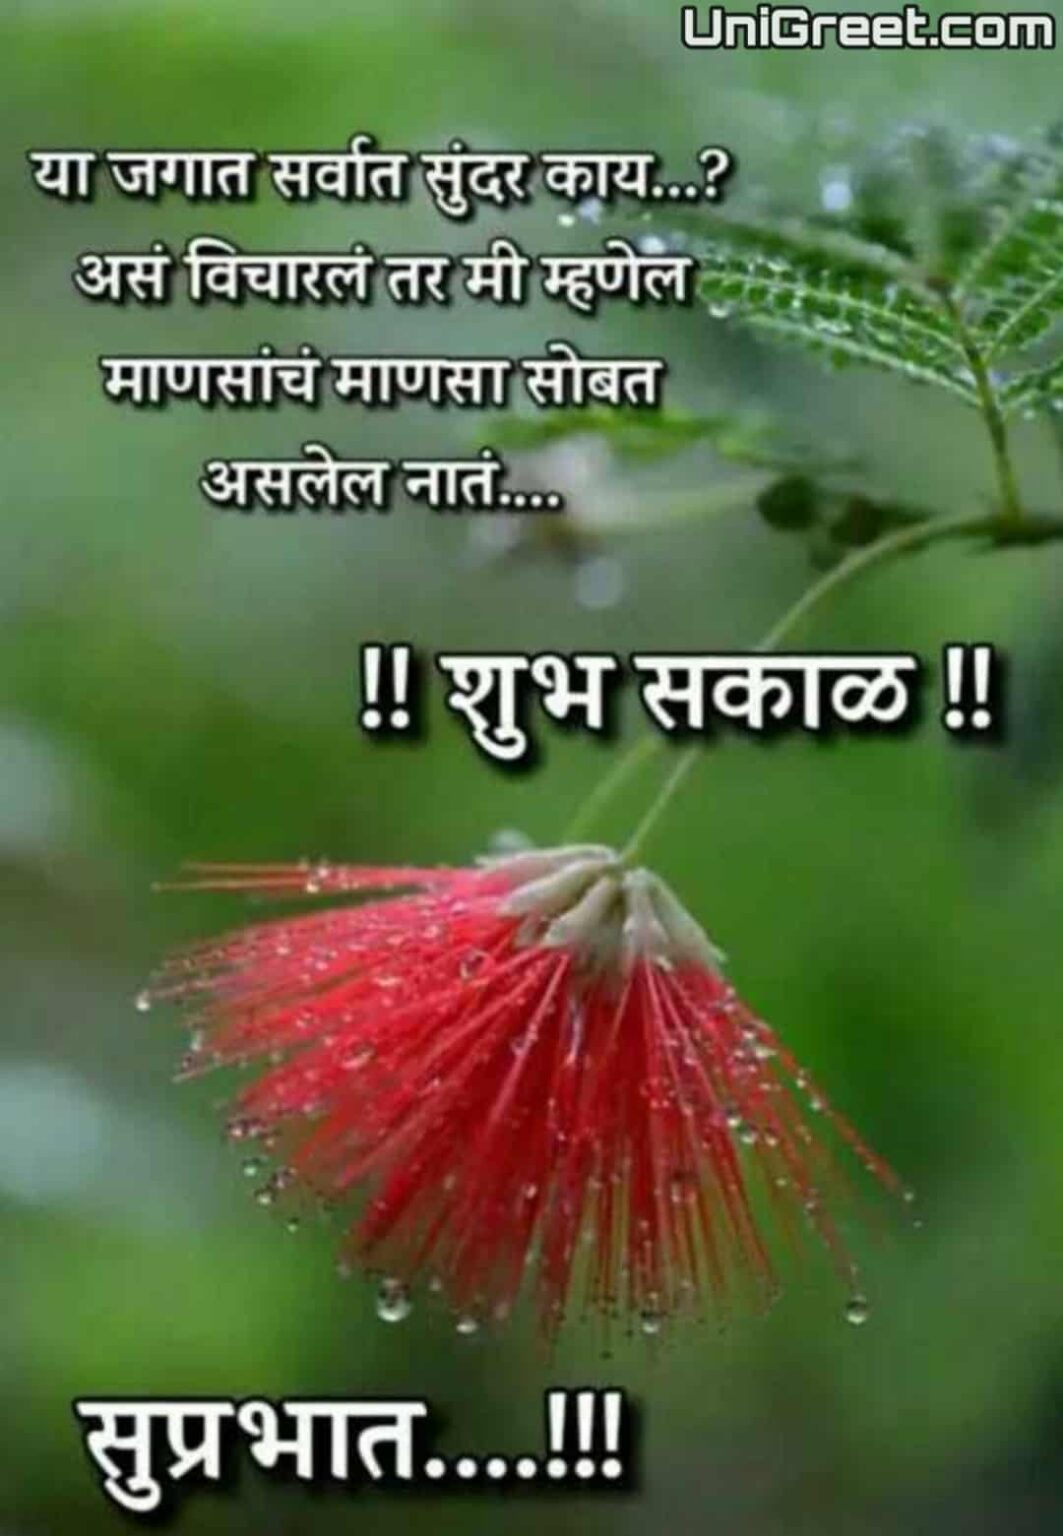 100+ शुभ सकाळ मराठी शुभेच्छा | Good Morning Wishes Images Quotes Status